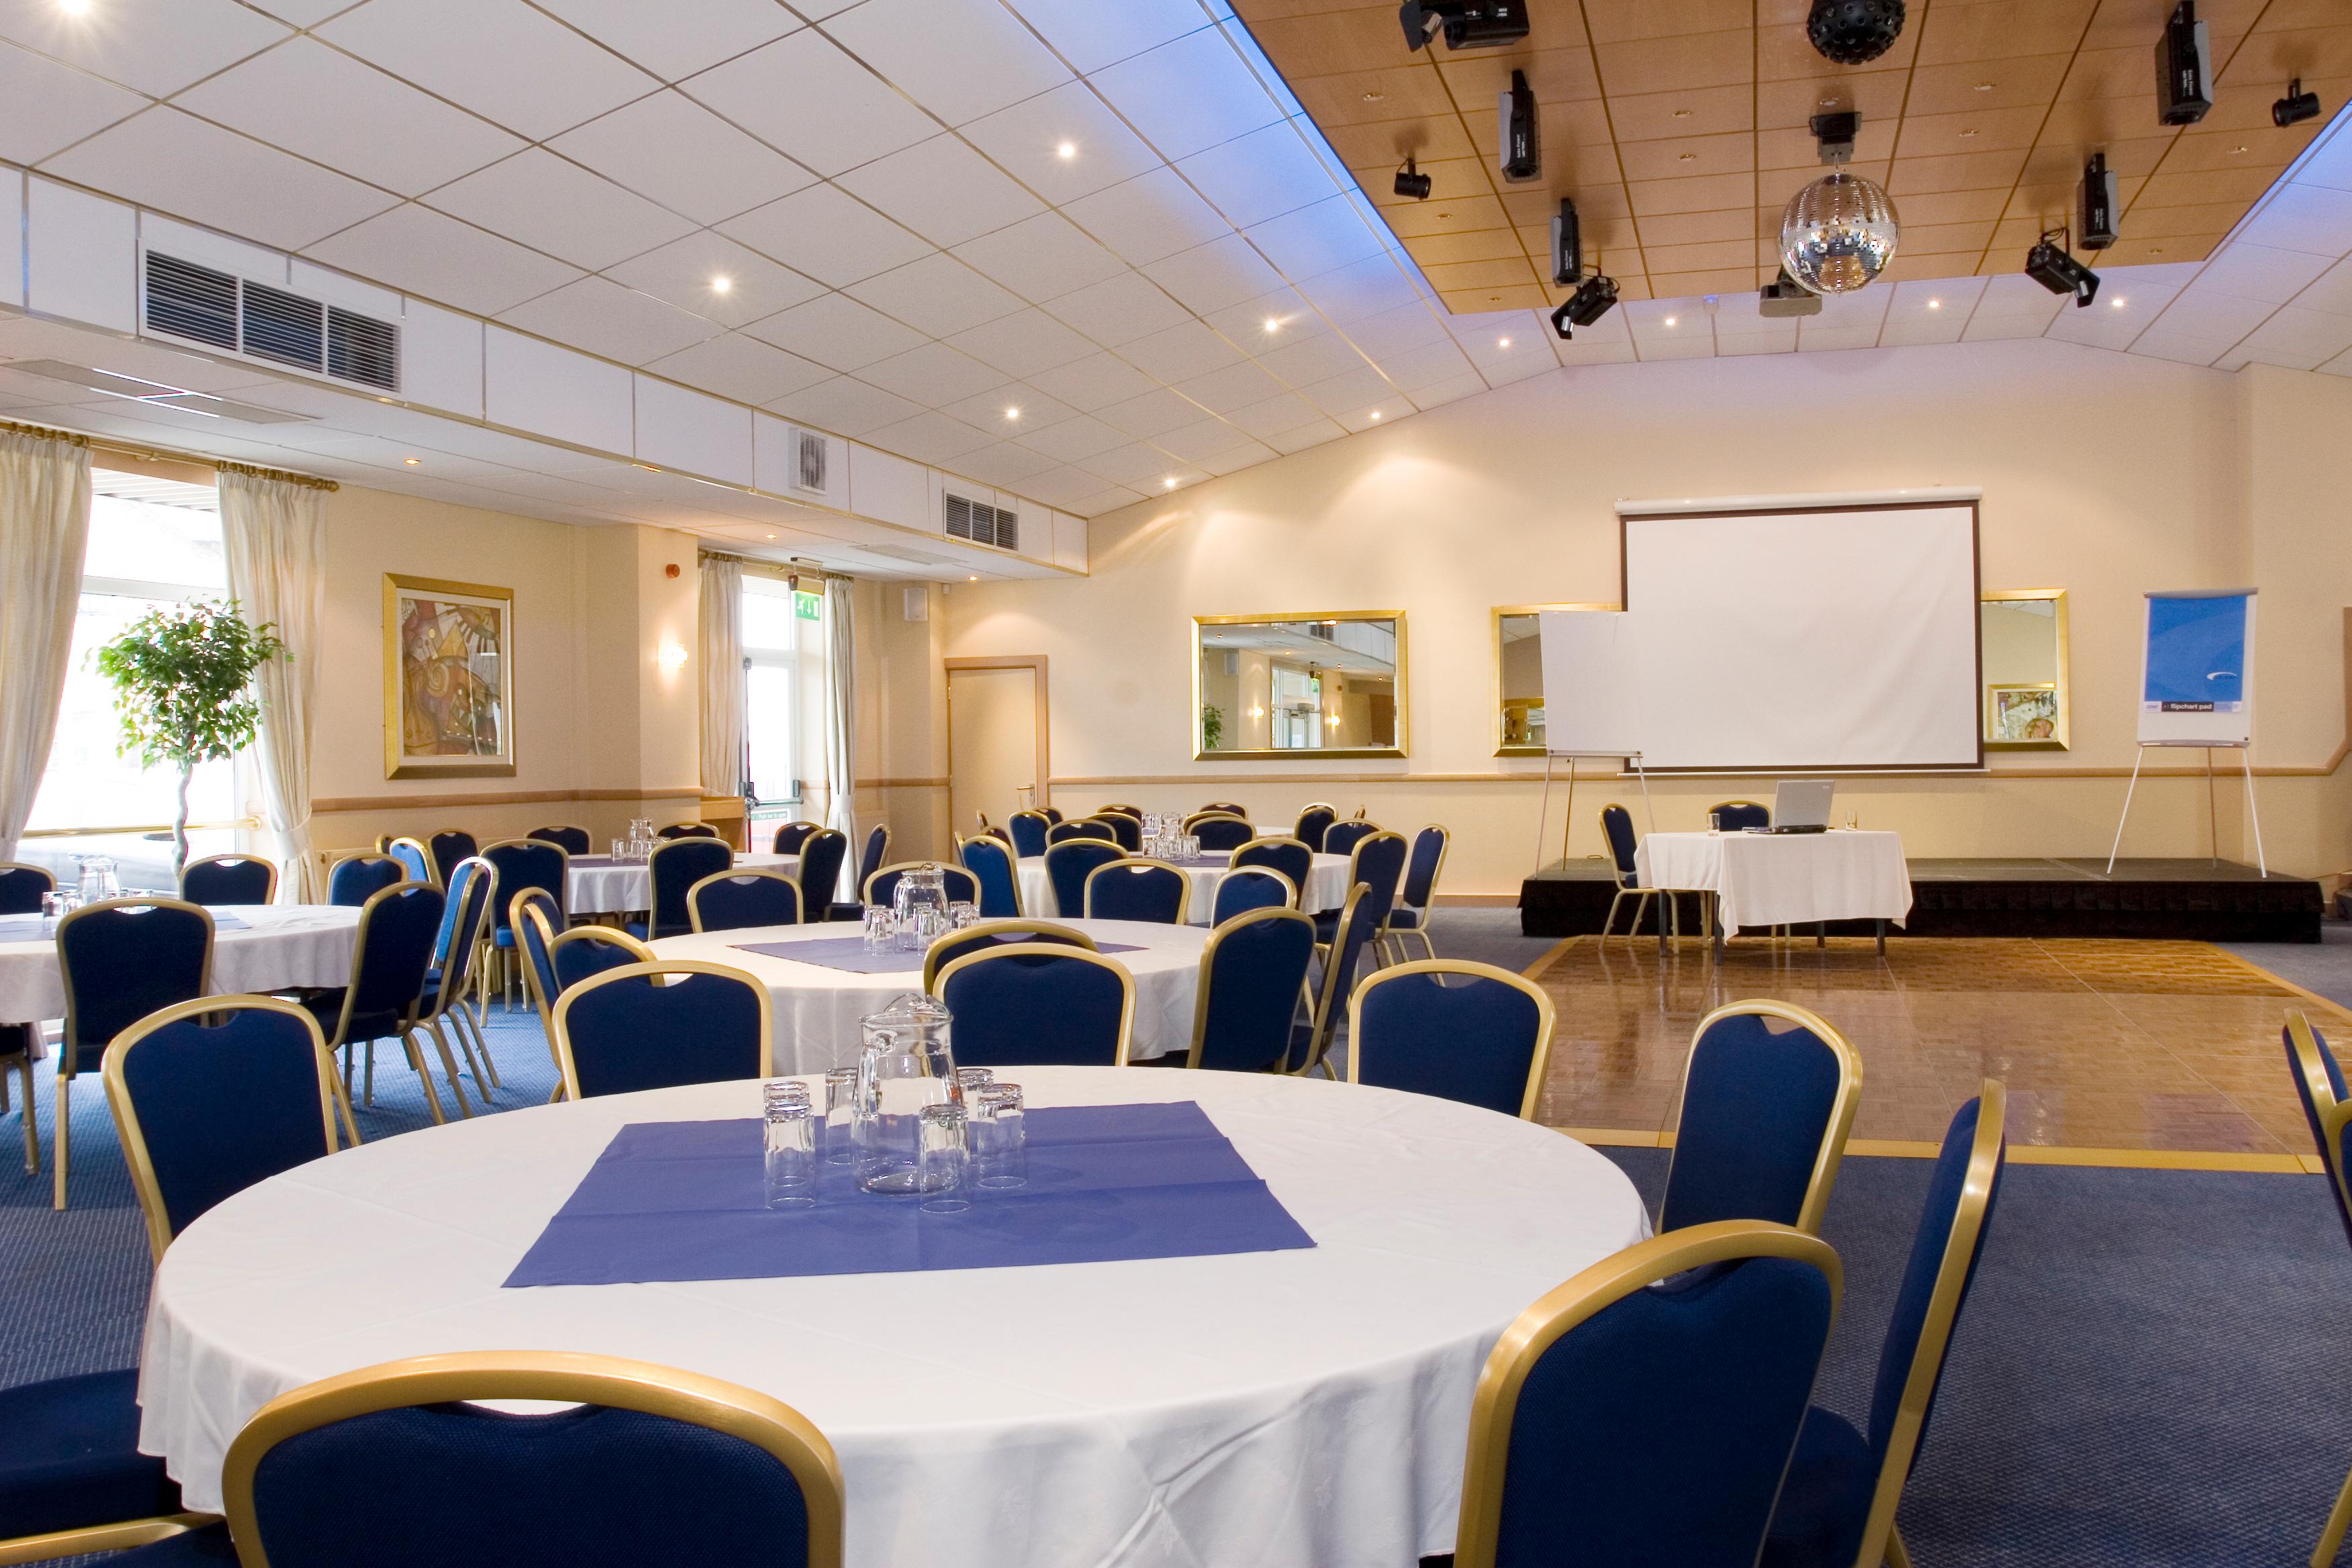 The Fairway And Bluebell Banqueting Suite photo #1